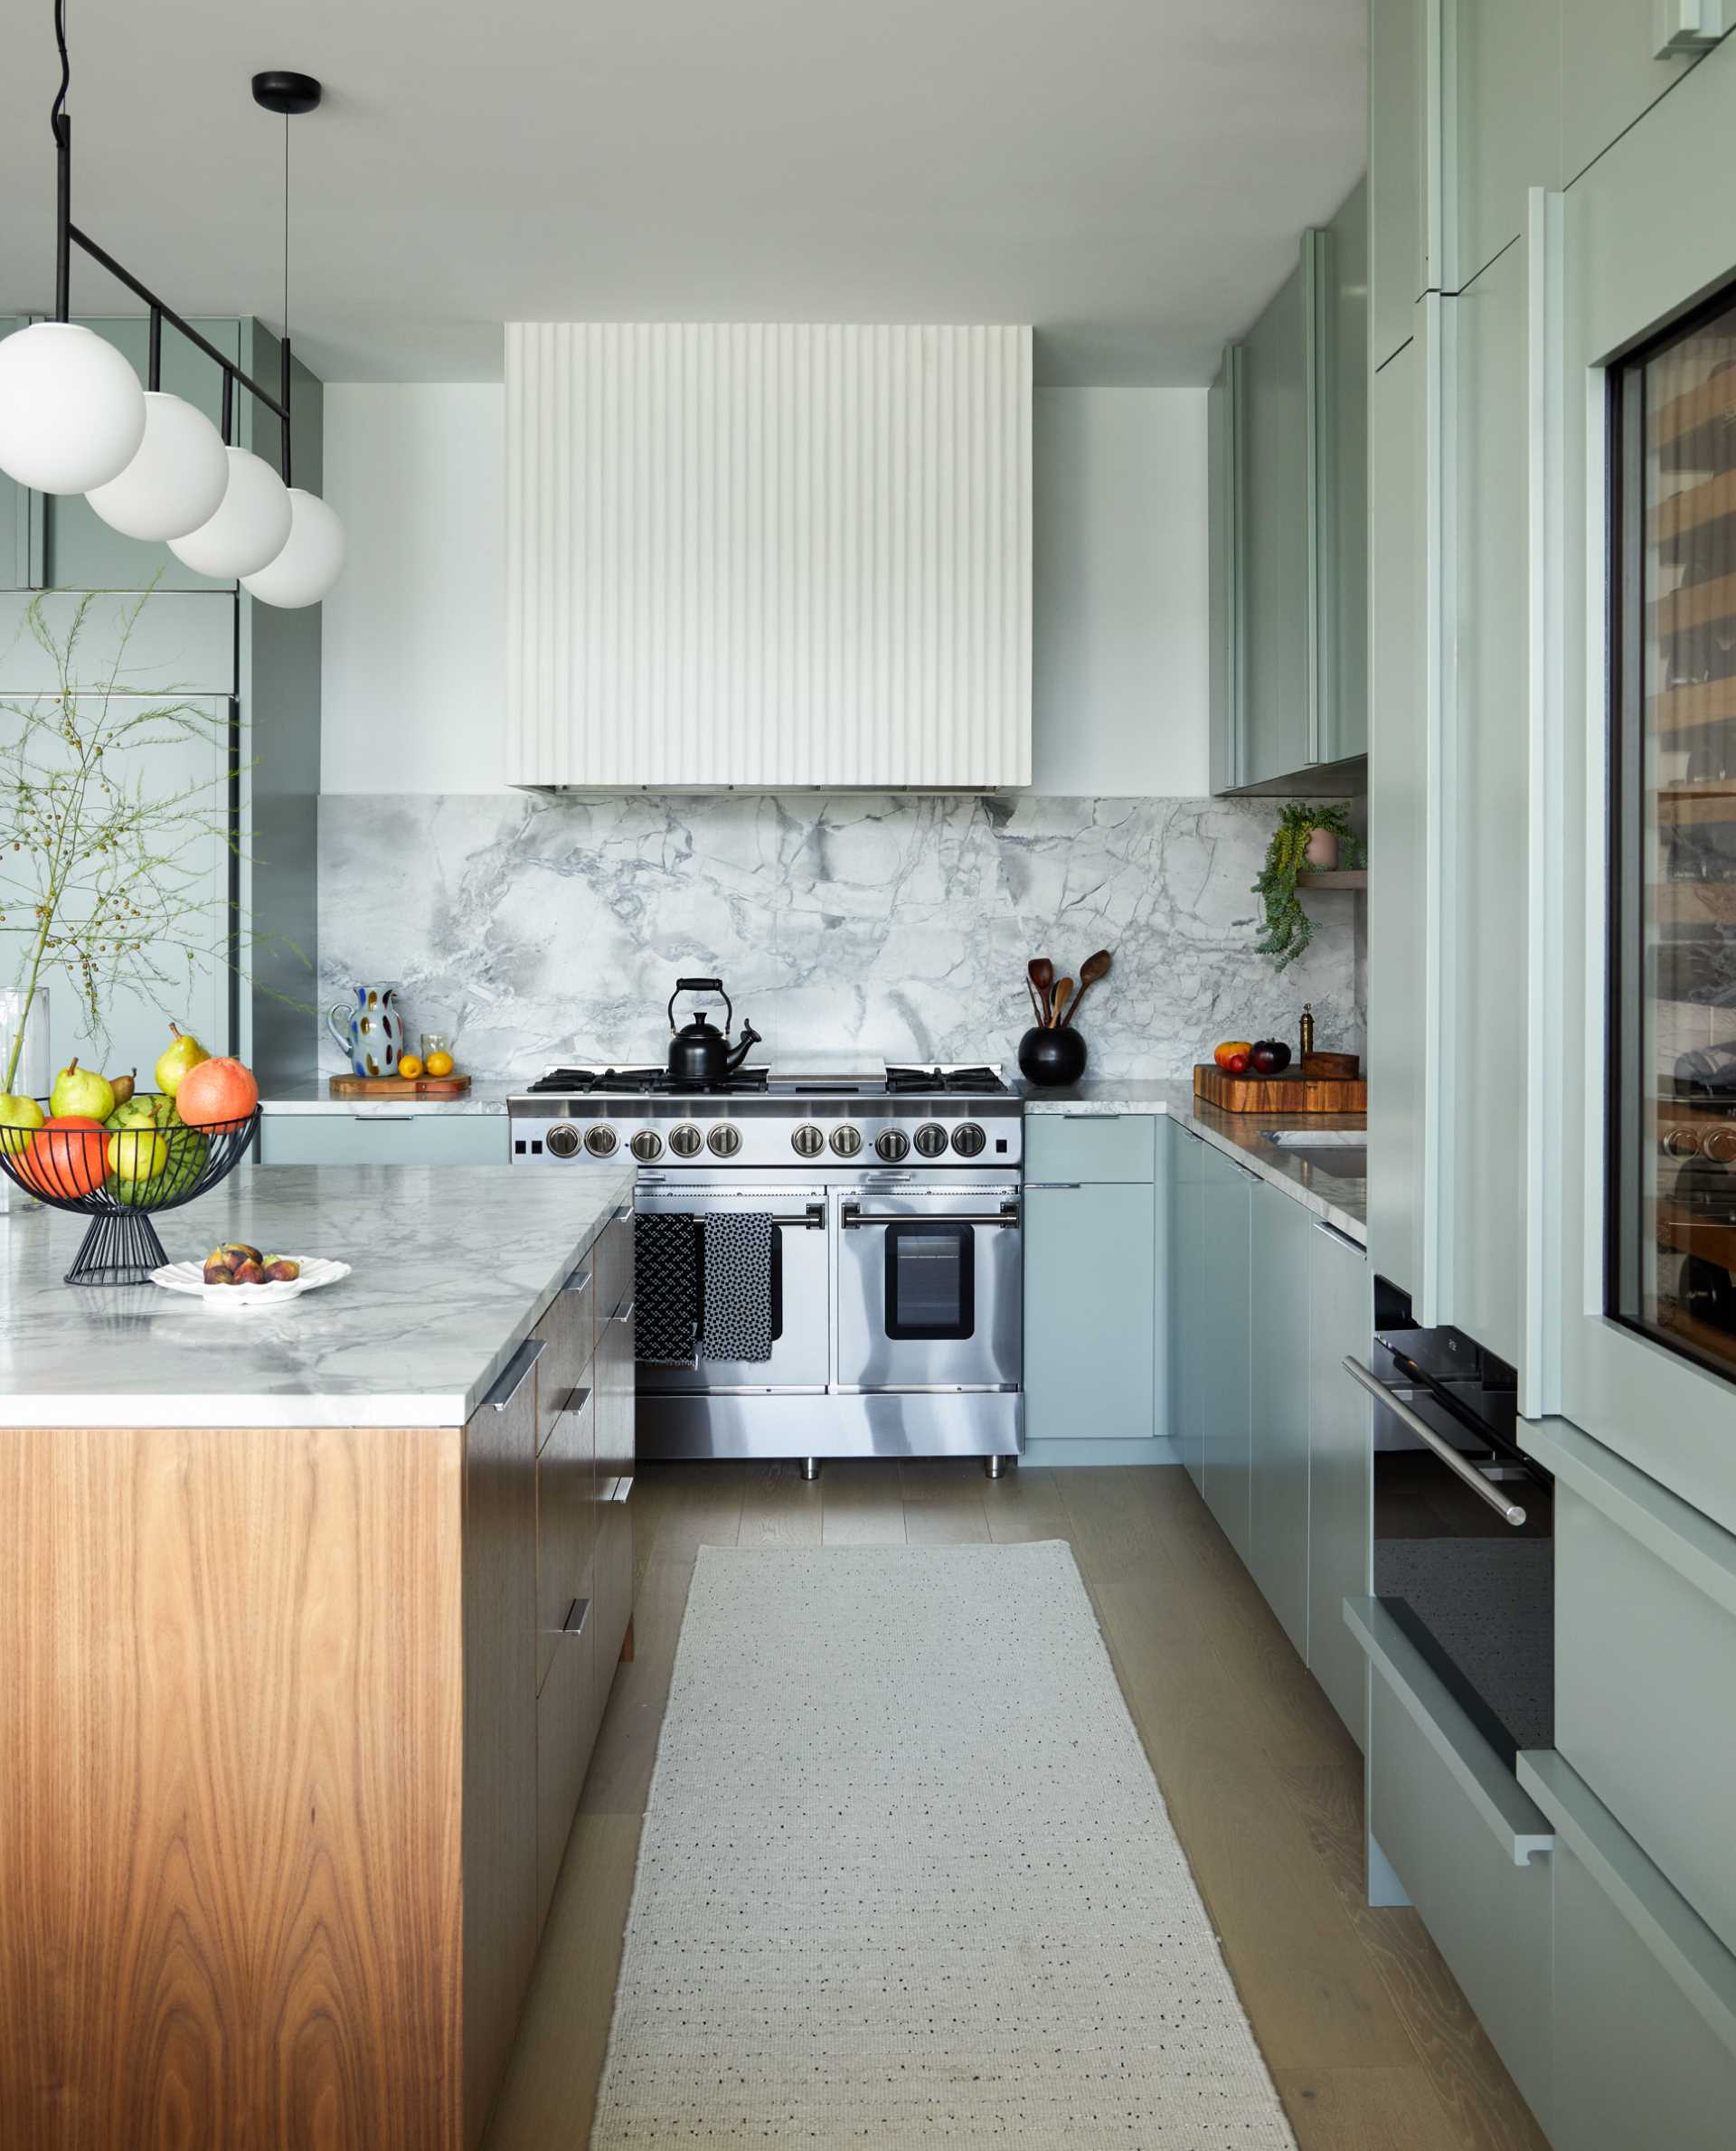 The remodeled kitchen and dining area includes a lighter palette overall, with white oak flooring, soft, creamy green cabinetry in the color of Benjamin Moore’s Rushing River, and Dolomite countertop and backsplash.